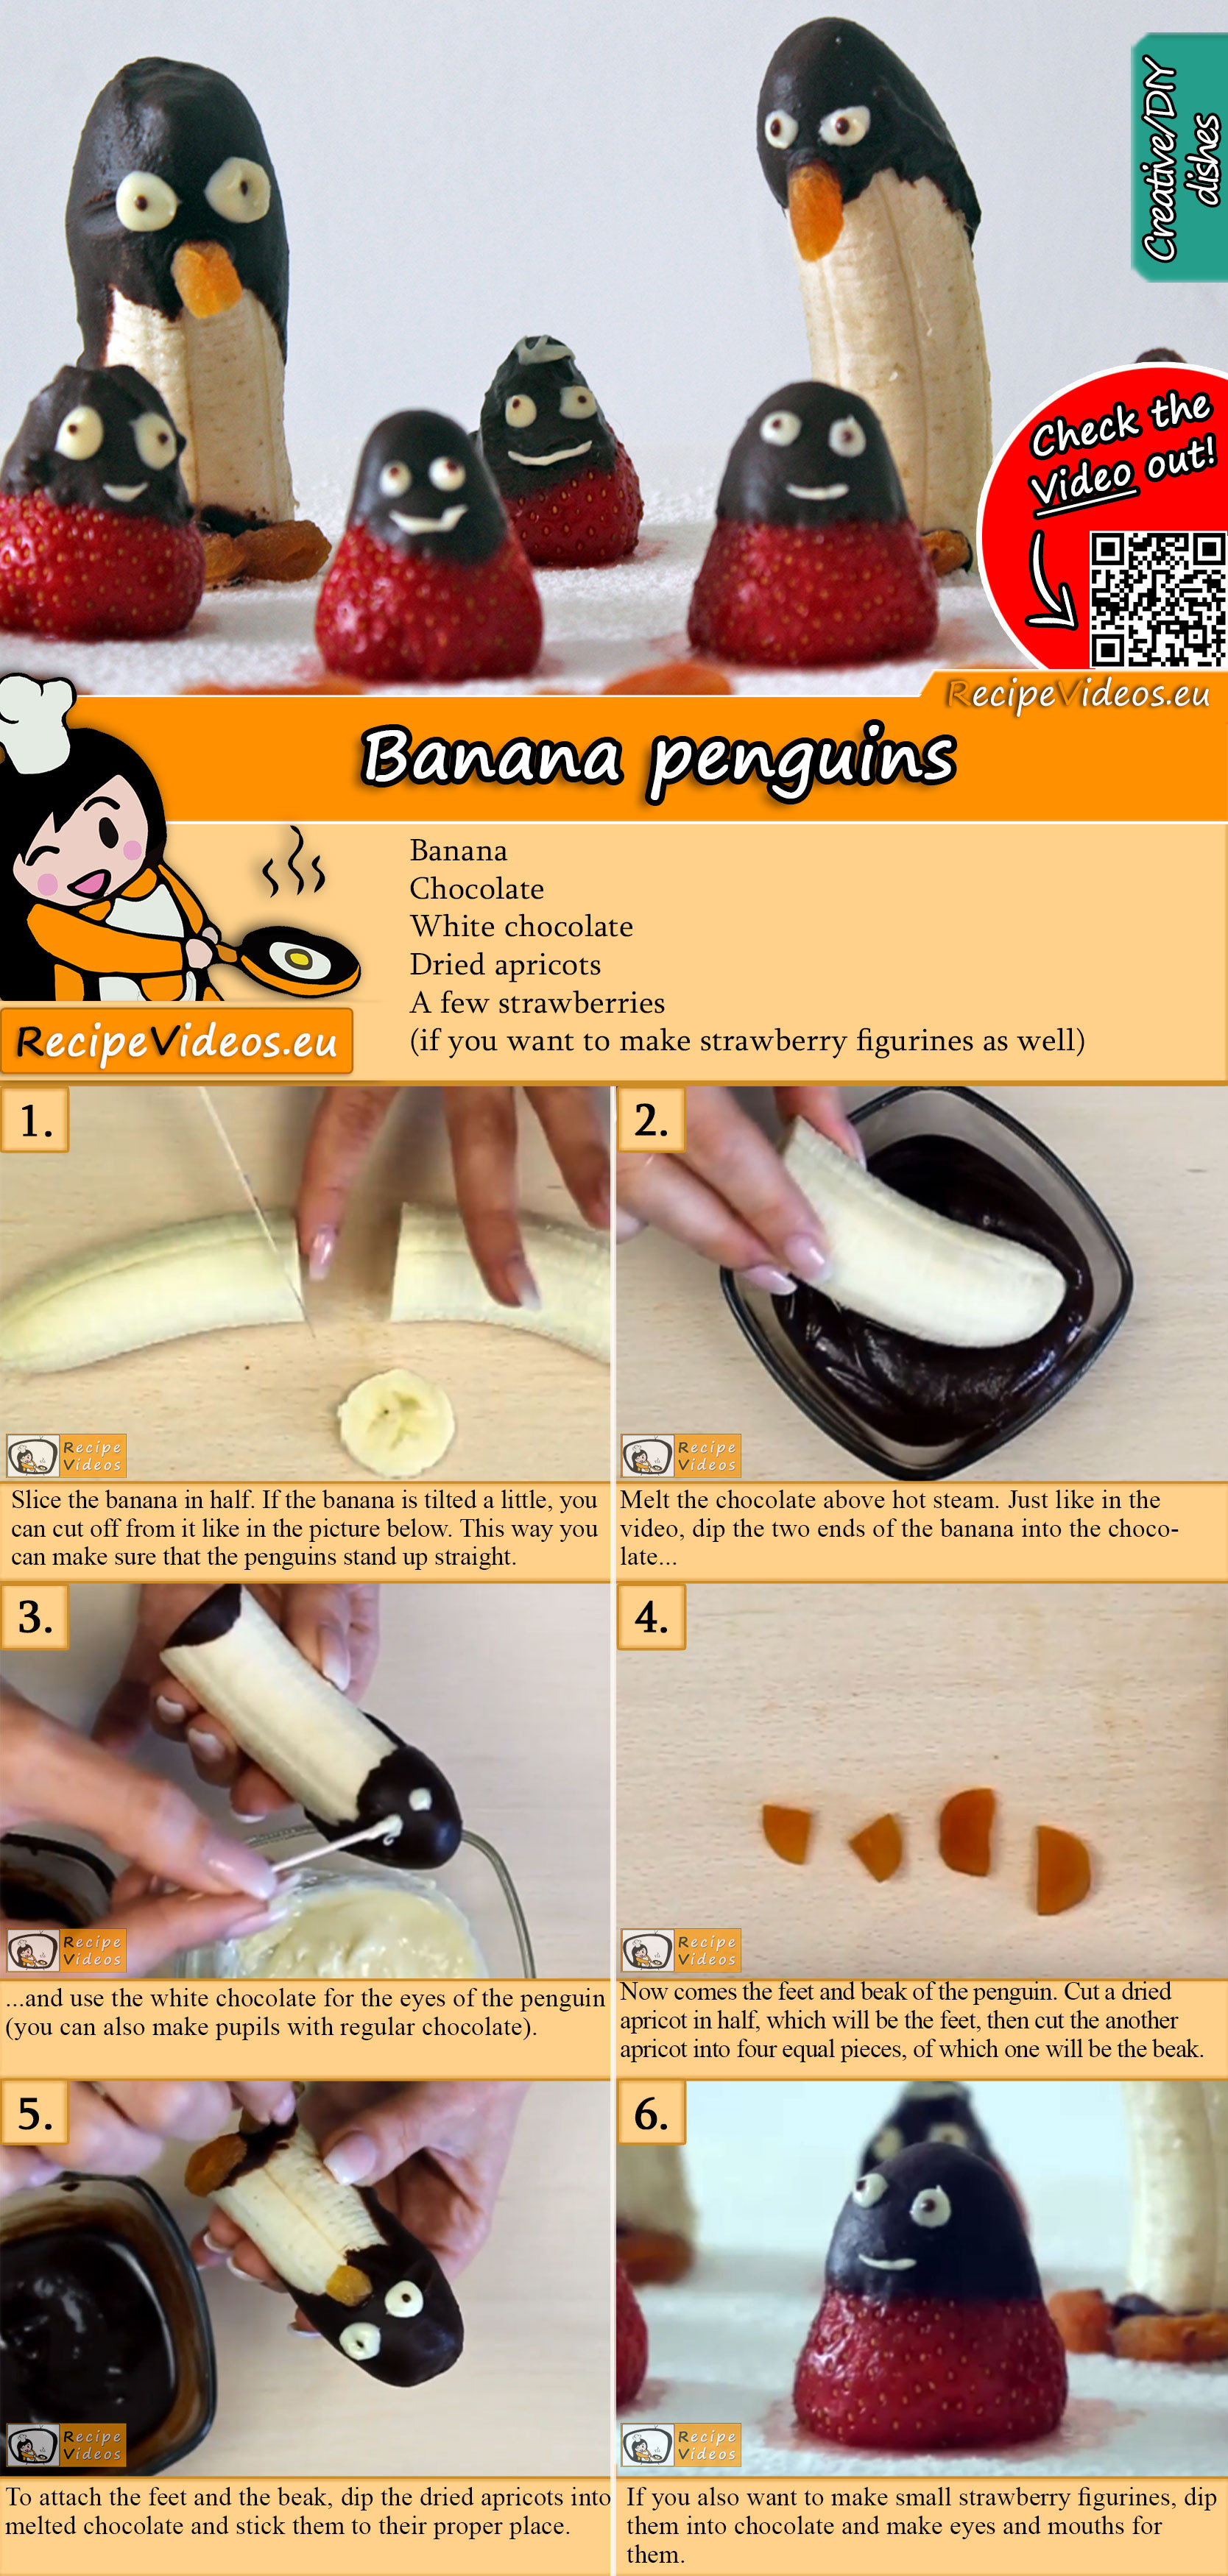 Banana Penguins recipe with video